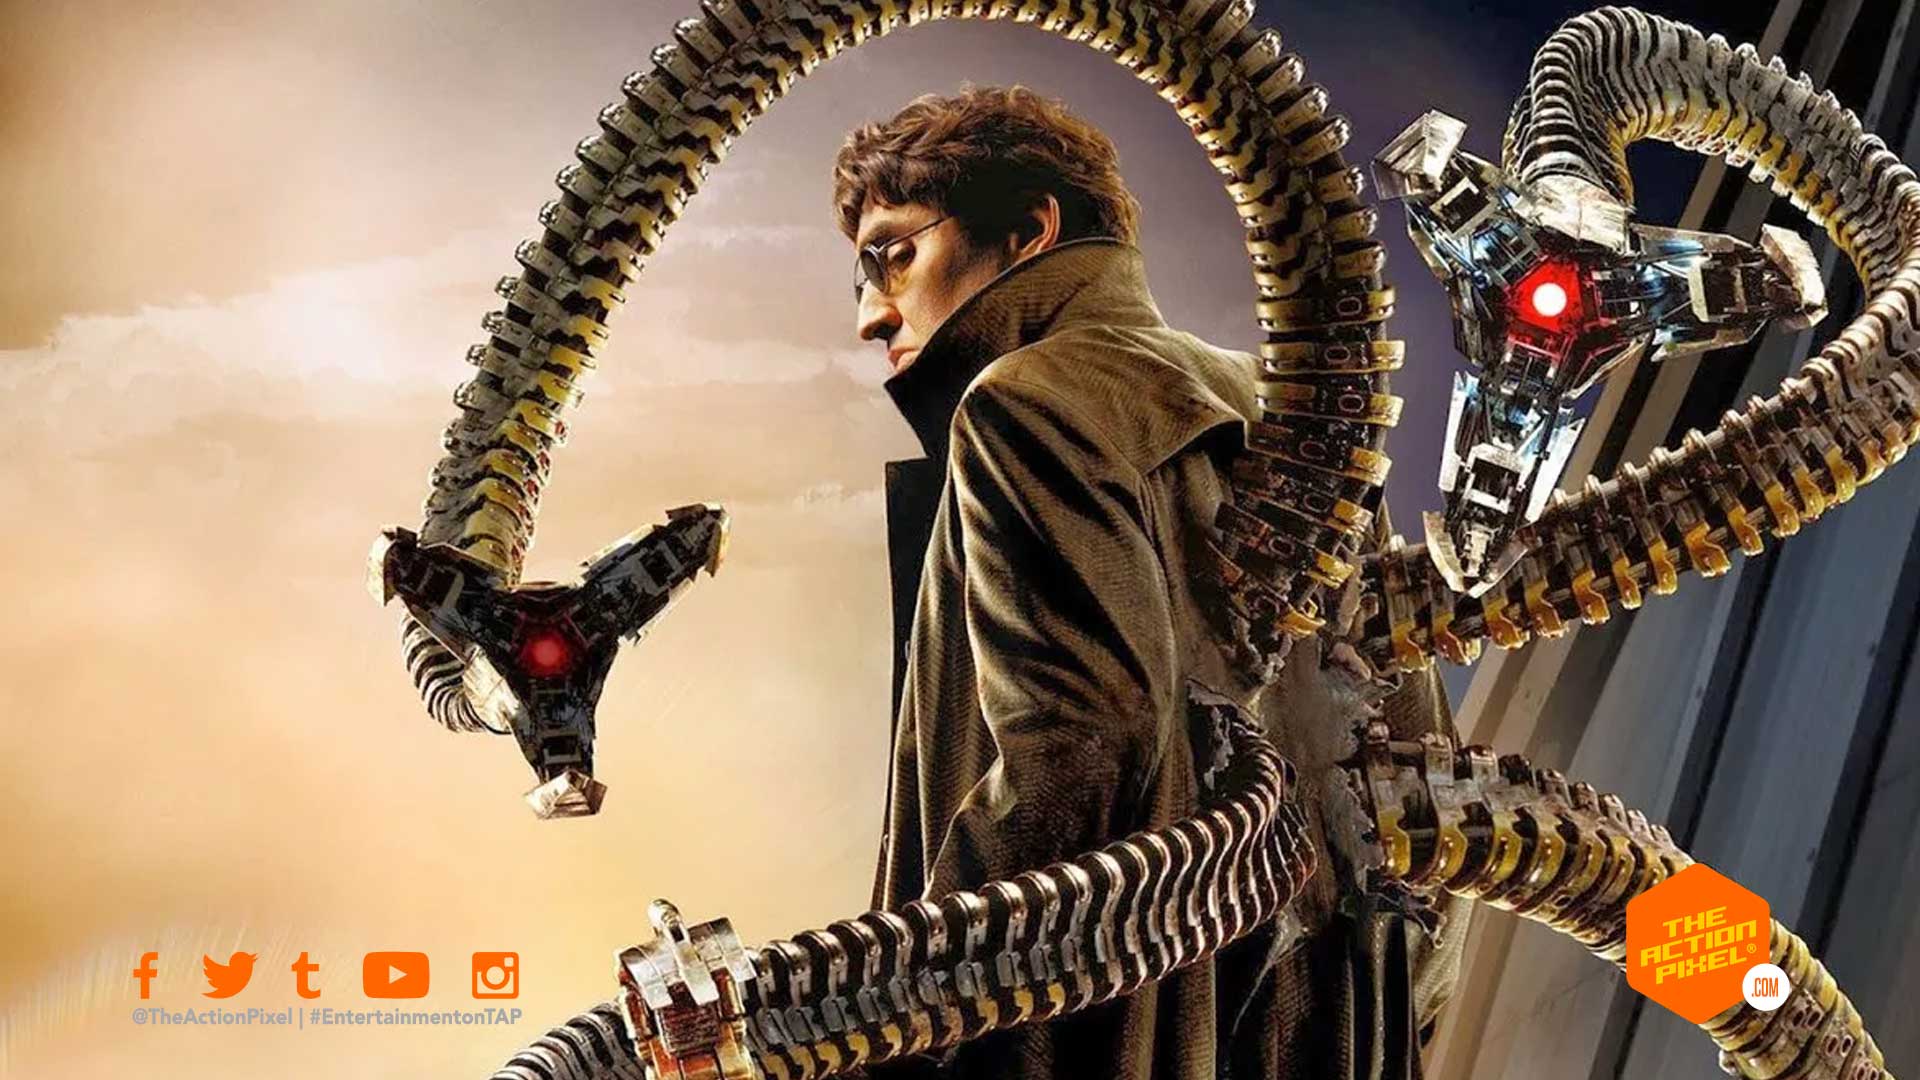 doc ock, alfred molina, doctor octavius, doc oc, spider-man, spider-man 3, spiderman, spider man, marvel ,sony pictures, entertainment on tap, featured,spider-man 2, the action pixel, entertainment on tap, entertainment news,